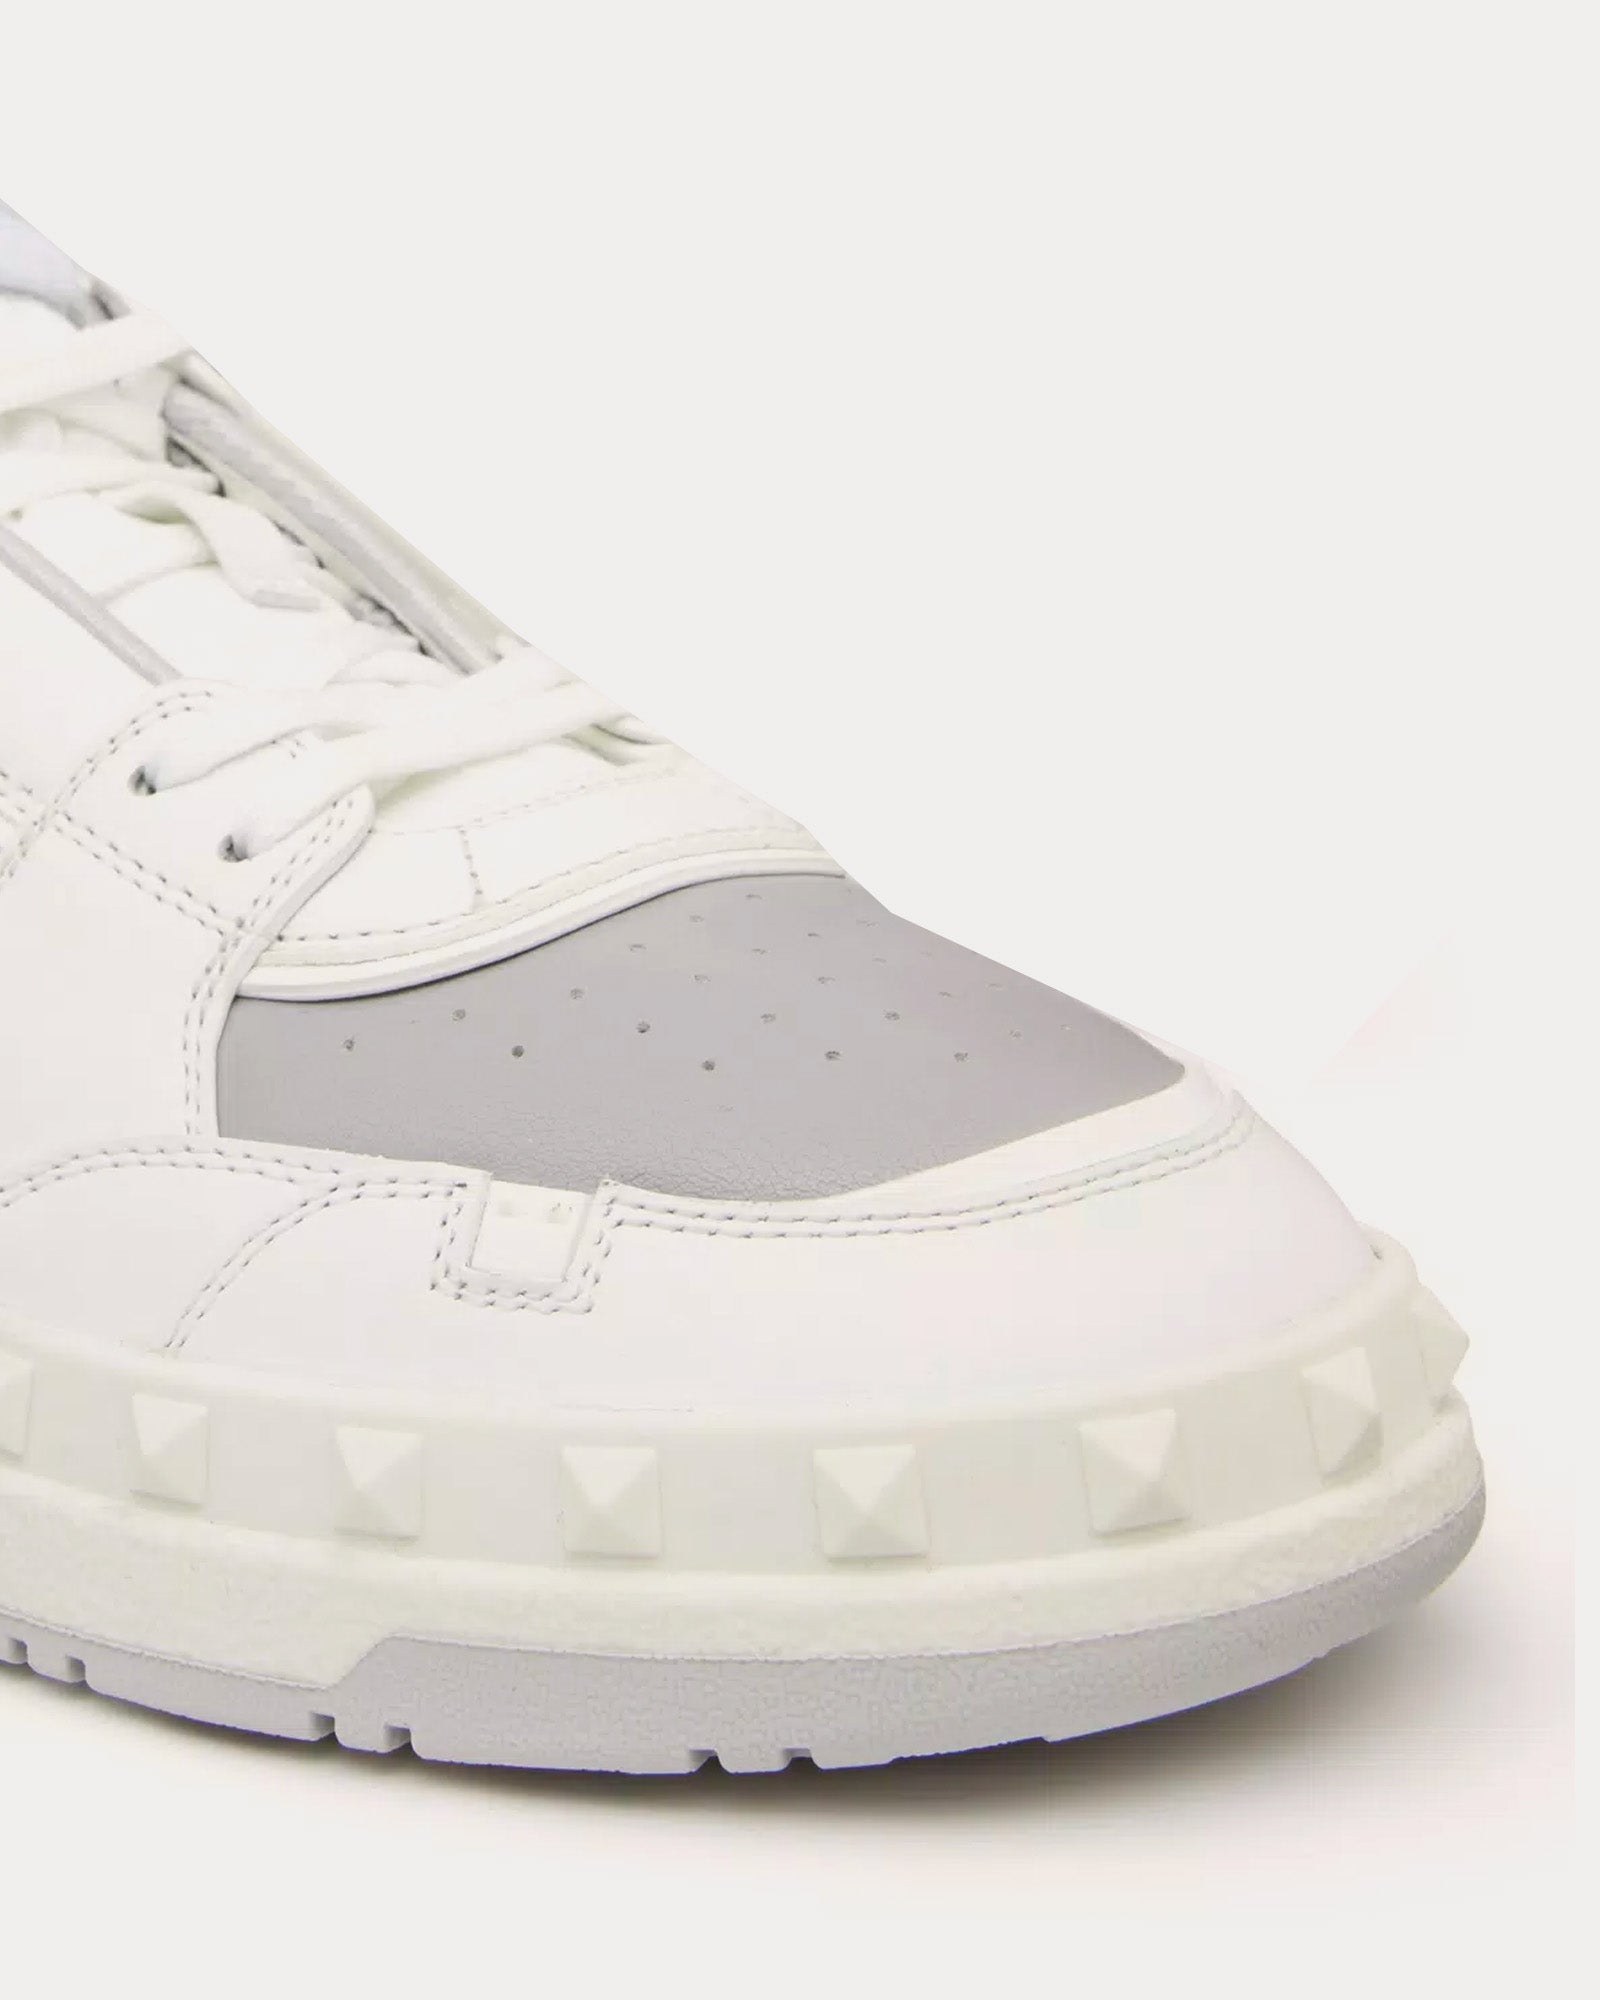 Valentino - Freedots Calfskin White / Pastel Grey Low Top Sneakers